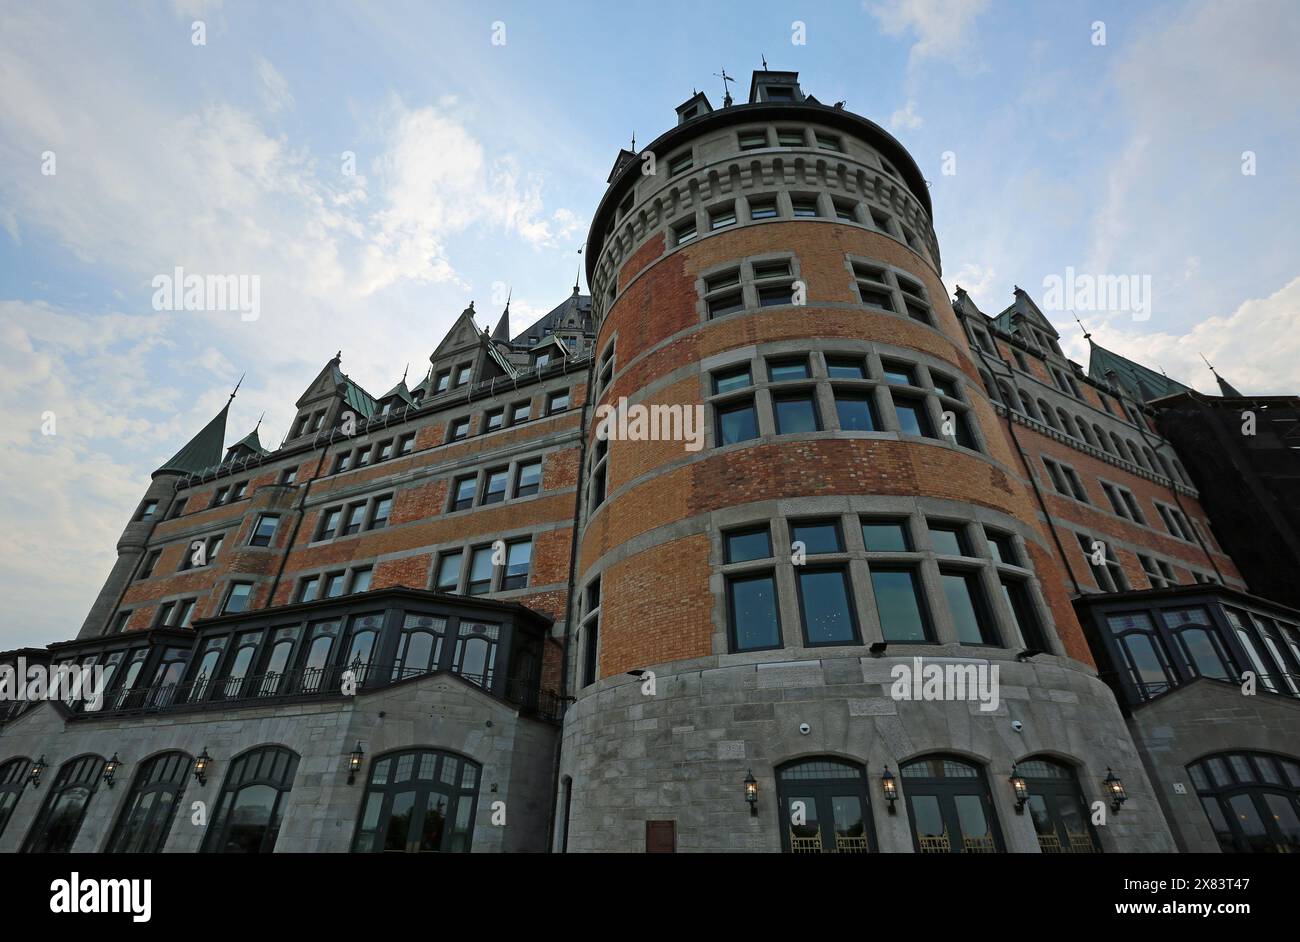 Circular tower of Chateau Frontenac, Quebec City, Canada Stock Photo